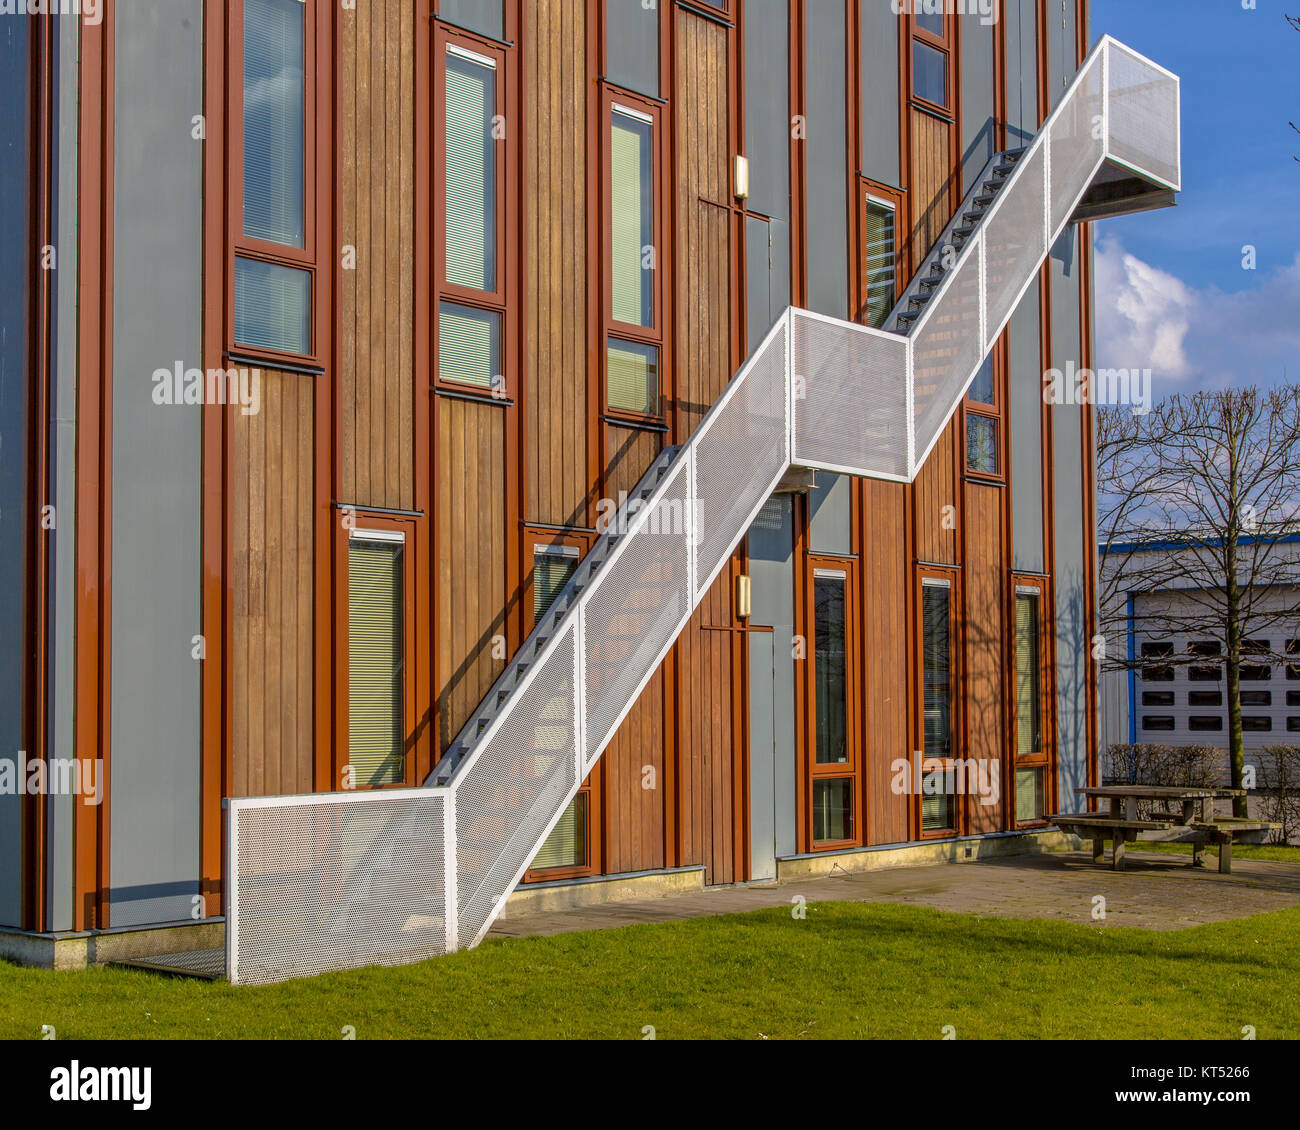 Wooden facade of sustainable office building with emergency exit escape ladder on the exterior Stock Photo